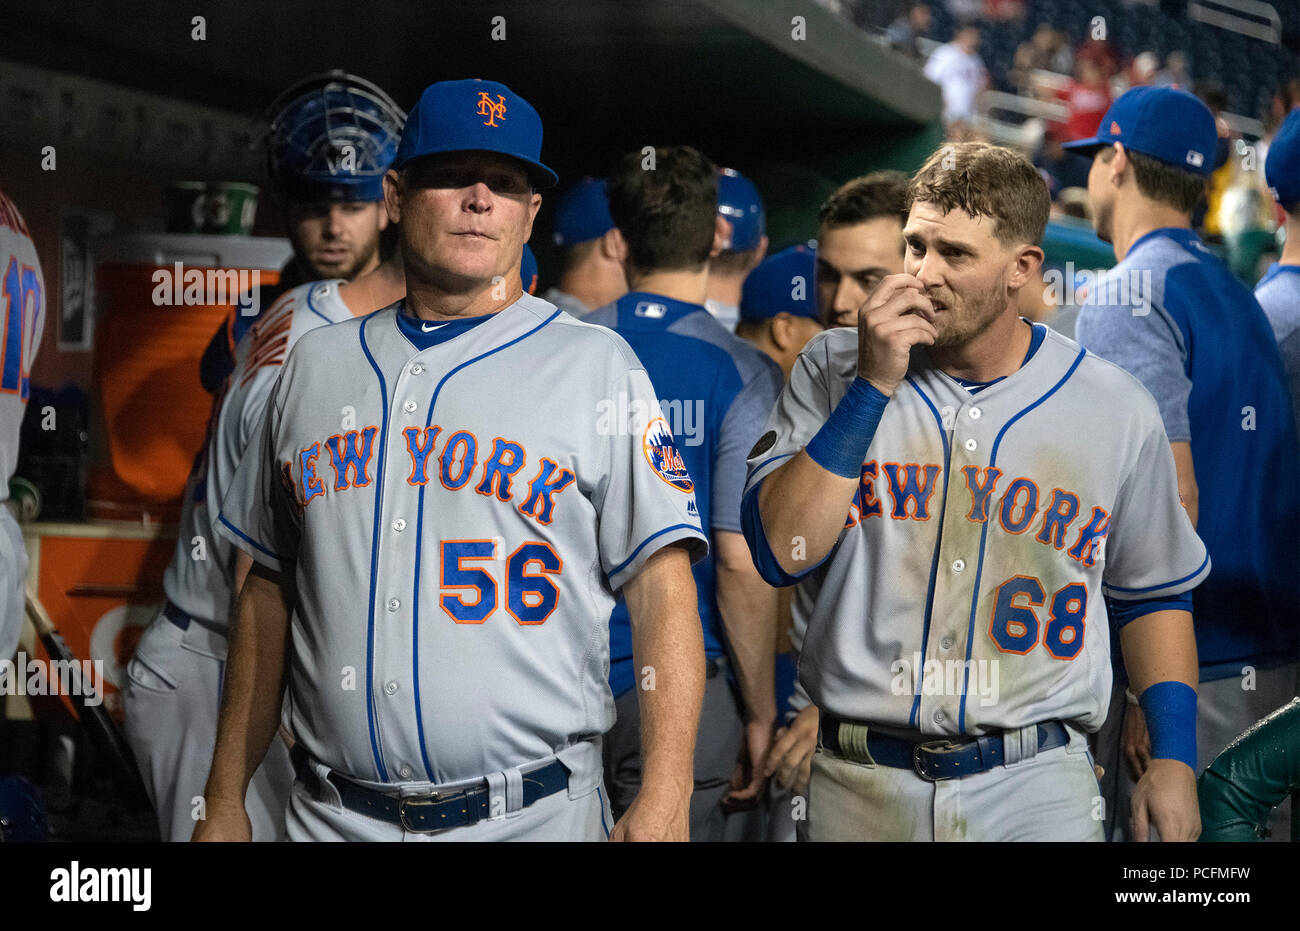 Washington, United States Of America. 31st July, 2018. New York Mets assistant hitting coach Tom Slater (56) and second baseman Jeff McNeil (68) in the dugout in the ninth inning against the Washington Nationals at Nationals Park in Washington, DC on Tuesday, July 31, 2018. The Nationals won the game 25 - 4. Credit: Ron Sachs/CNP (RESTRICTION: NO New York or New Jersey Newspapers or newspapers within a 75 mile radius of New York City) | usage worldwide Credit: dpa/Alamy Live News Stock Photo